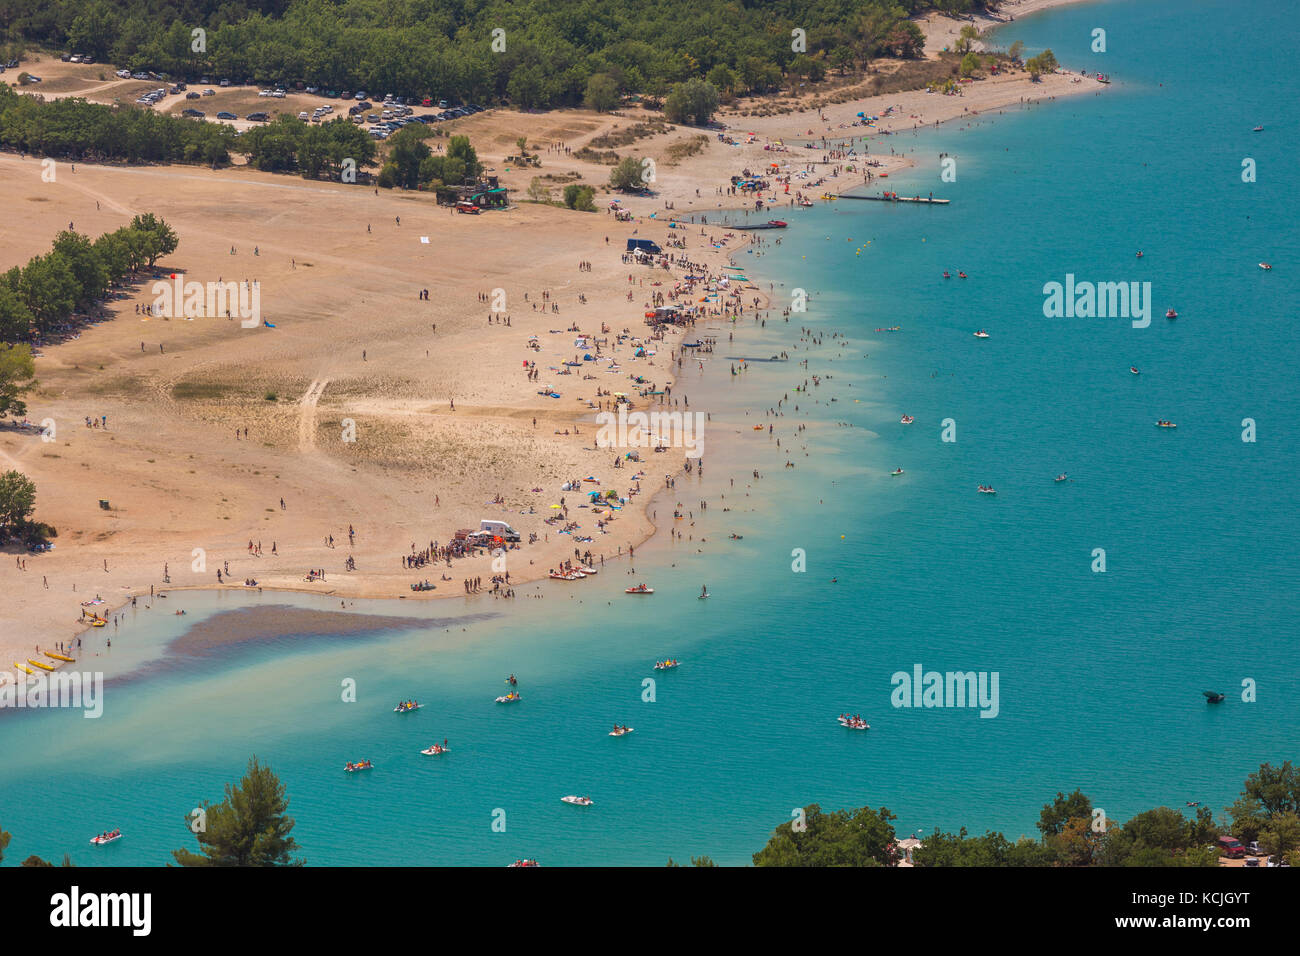 LAKE OF SAINTE-CROIX, PROVENCE, FRANCE - Aerial of people on beach and in boats at man-made lake, lac de Sainte-Croix. Stock Photo